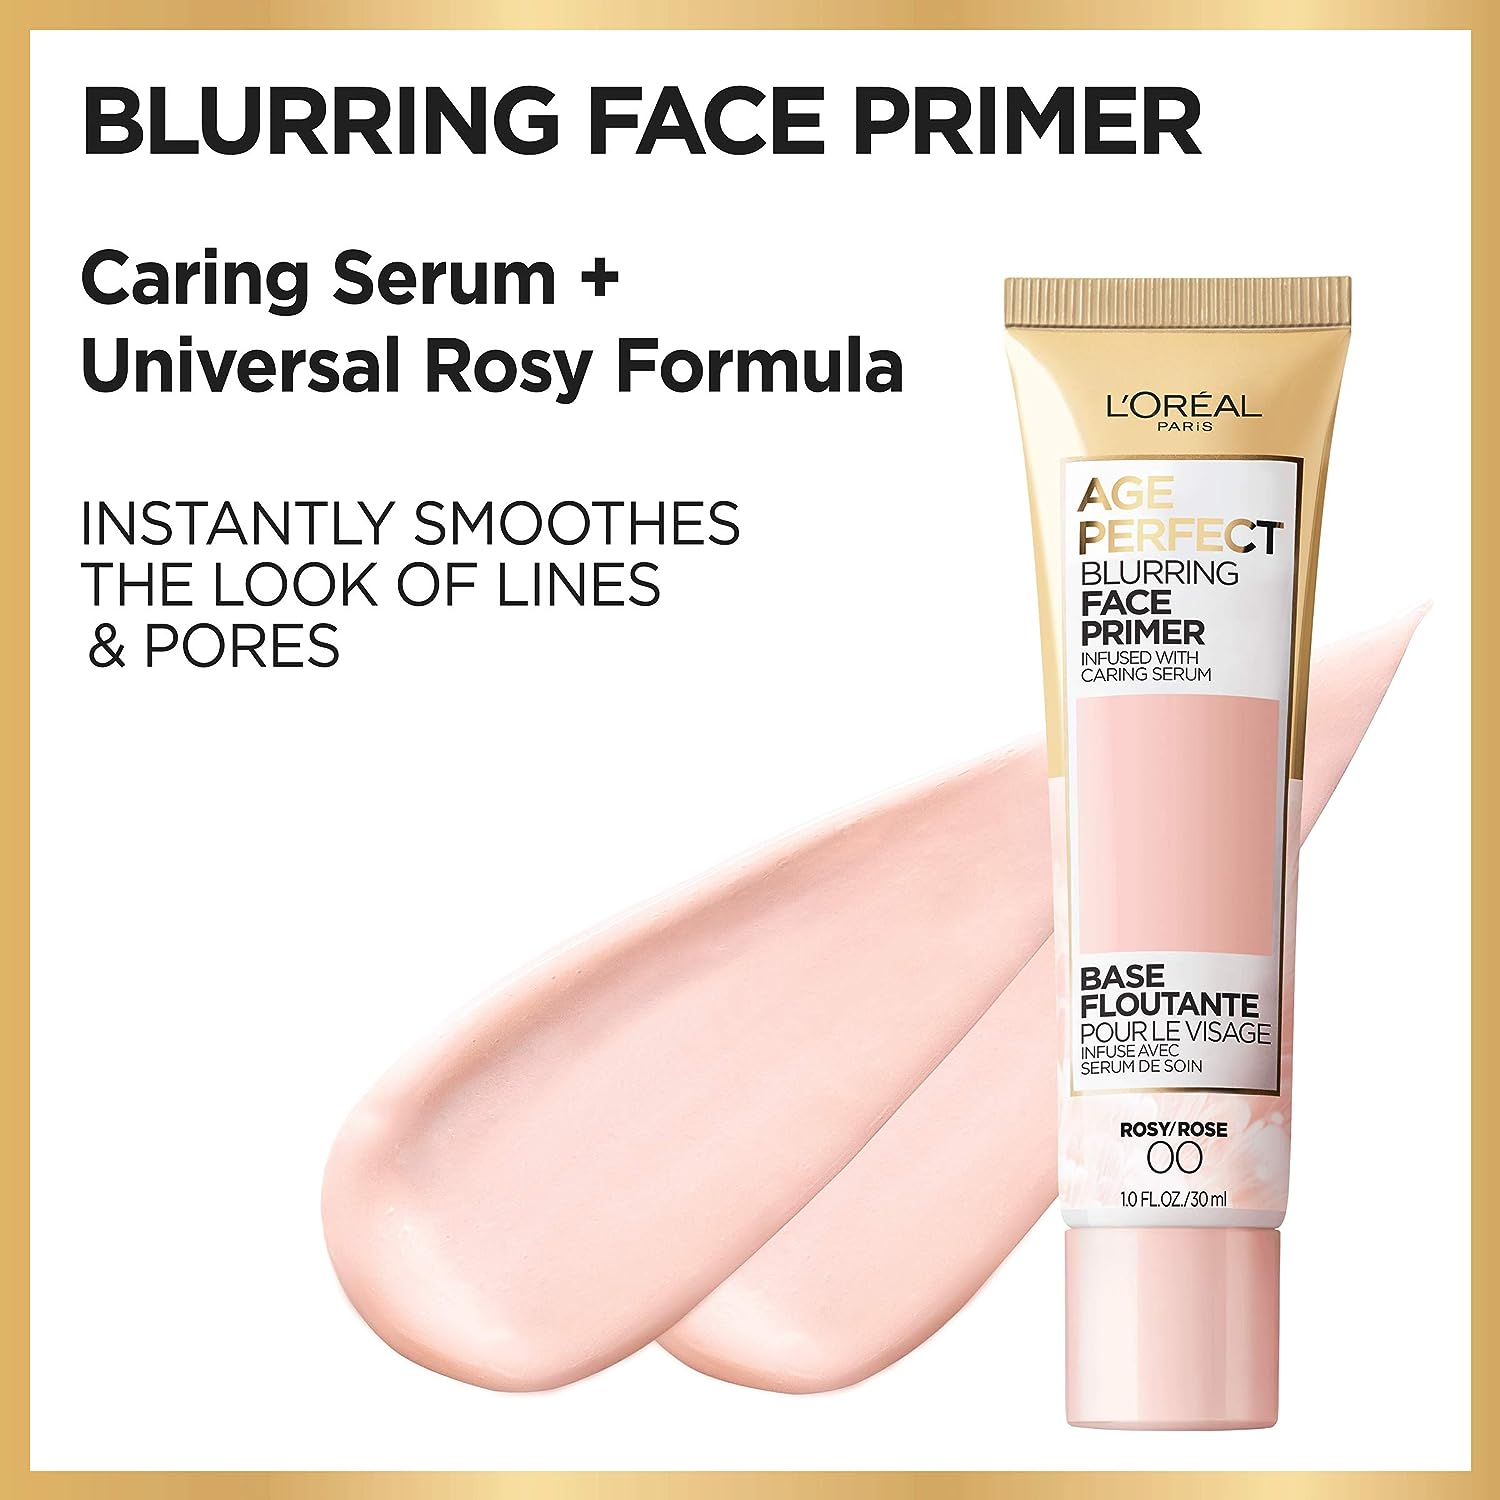  LOreal Paris Age Perfect Blurring Face Primer, Infused with Caring Serum, 1 fl. oz.